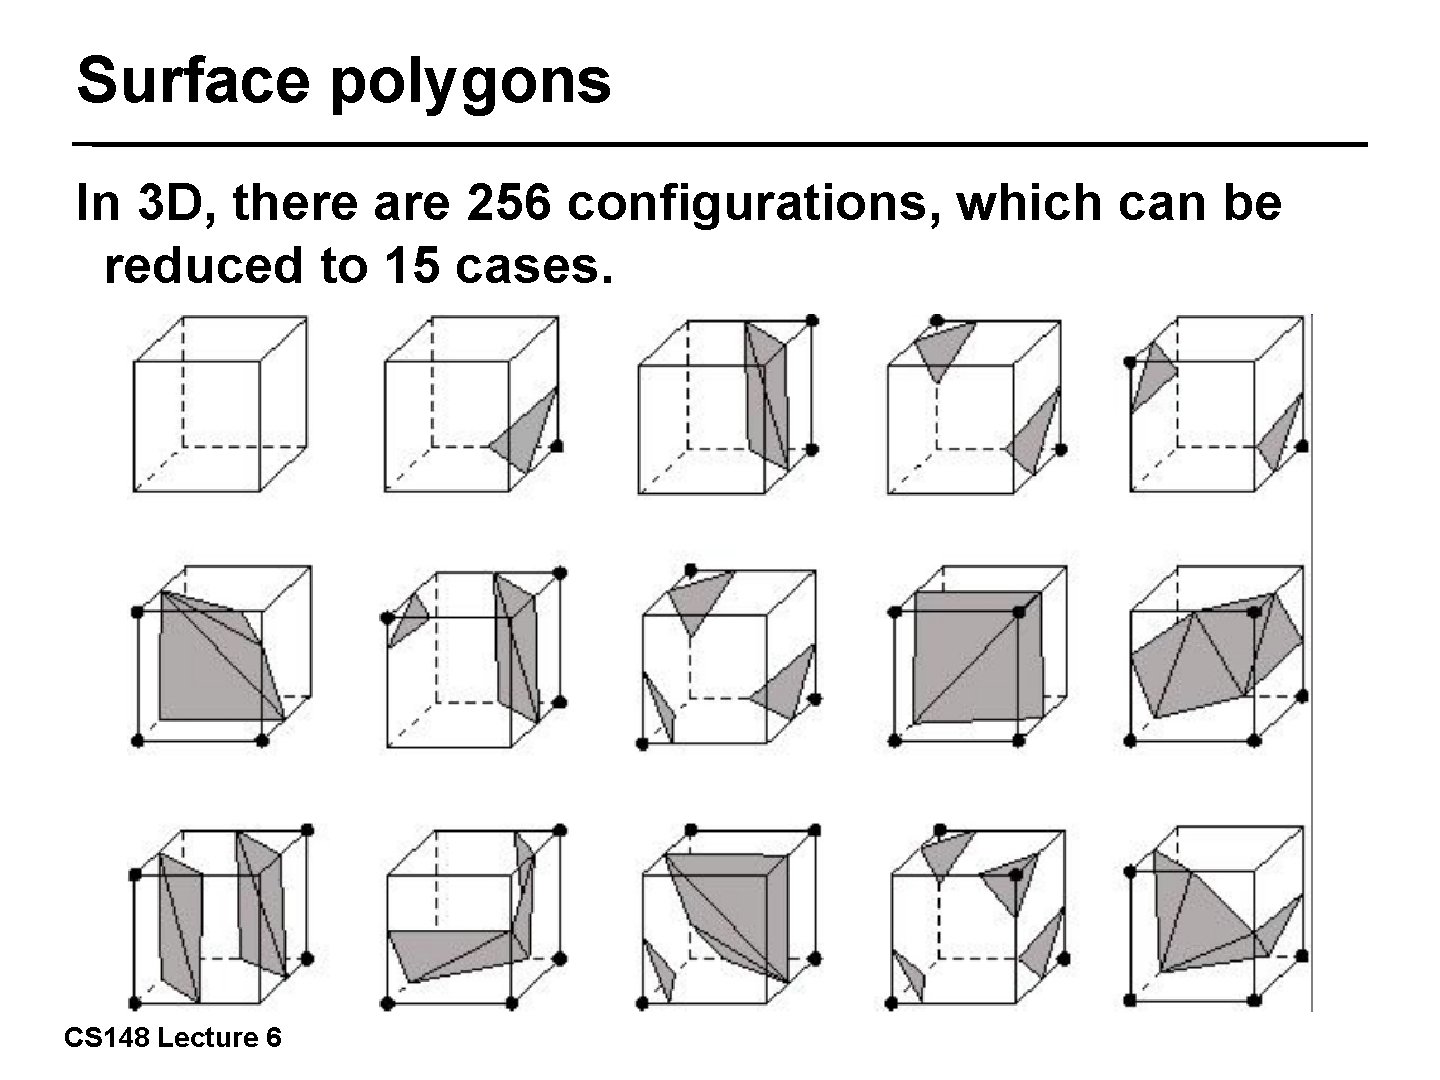 Surface polygons In 3 D, there are 256 configurations, which can be reduced to